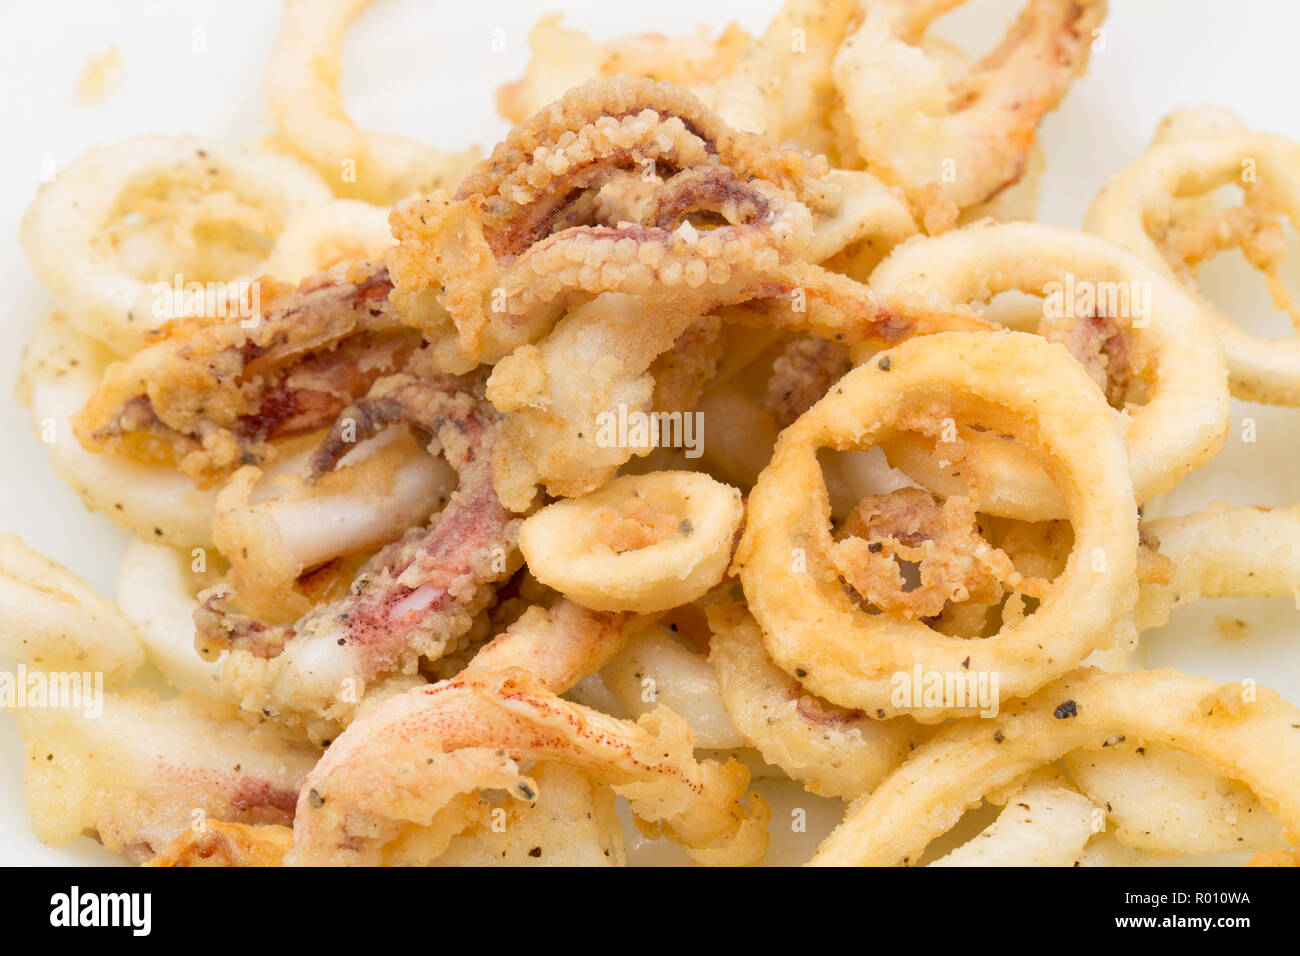 Homecooked, deep fried squid rings and tentacles from a squid, Loligo vulgaris, that was caught on rod and line from a pier. Dorset England UK GB Stock Photo